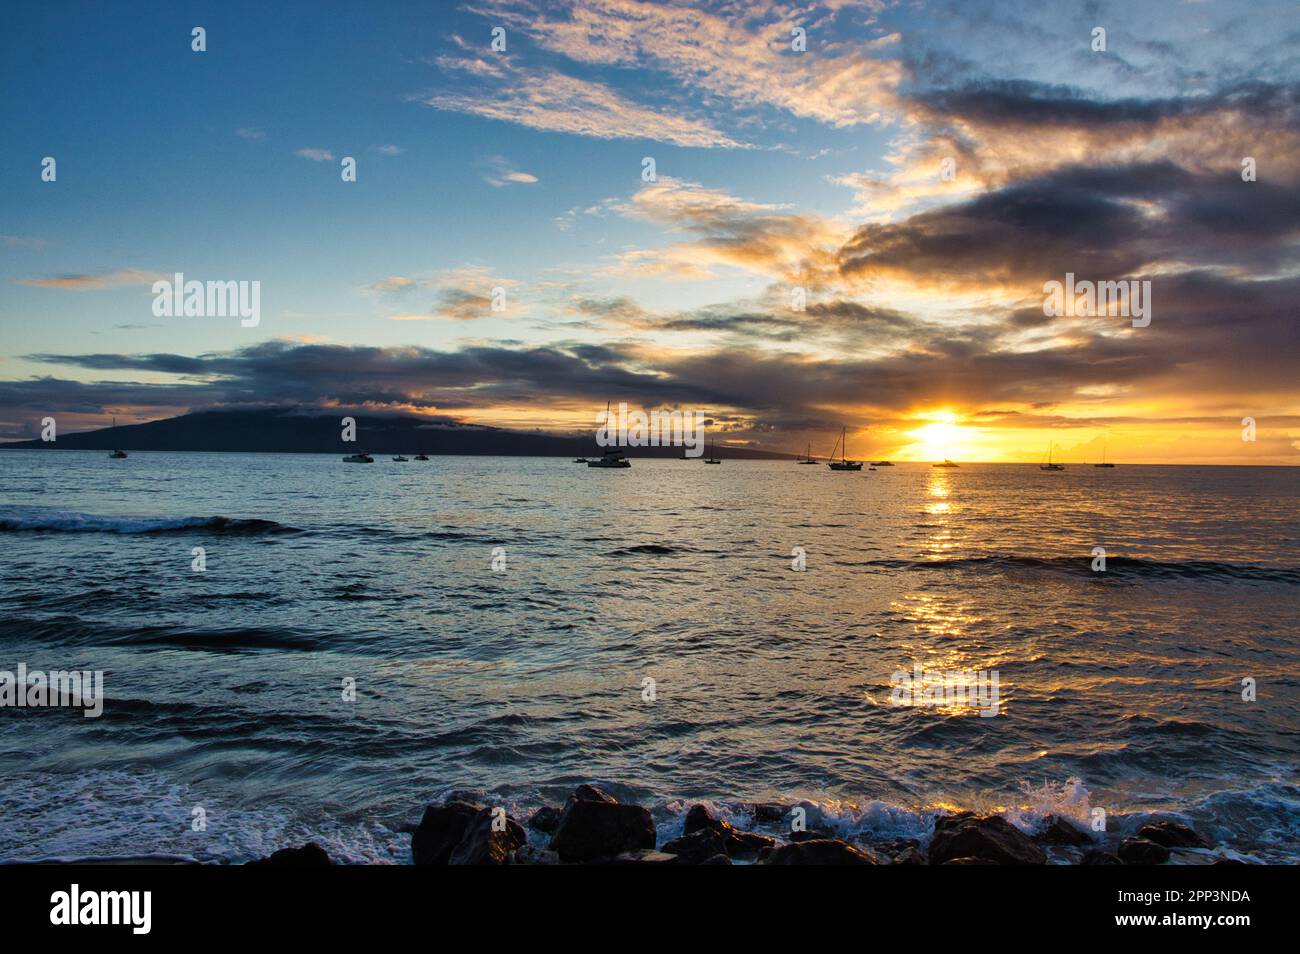 Sunset on Maui with Lanaii in the distance. Stock Photo